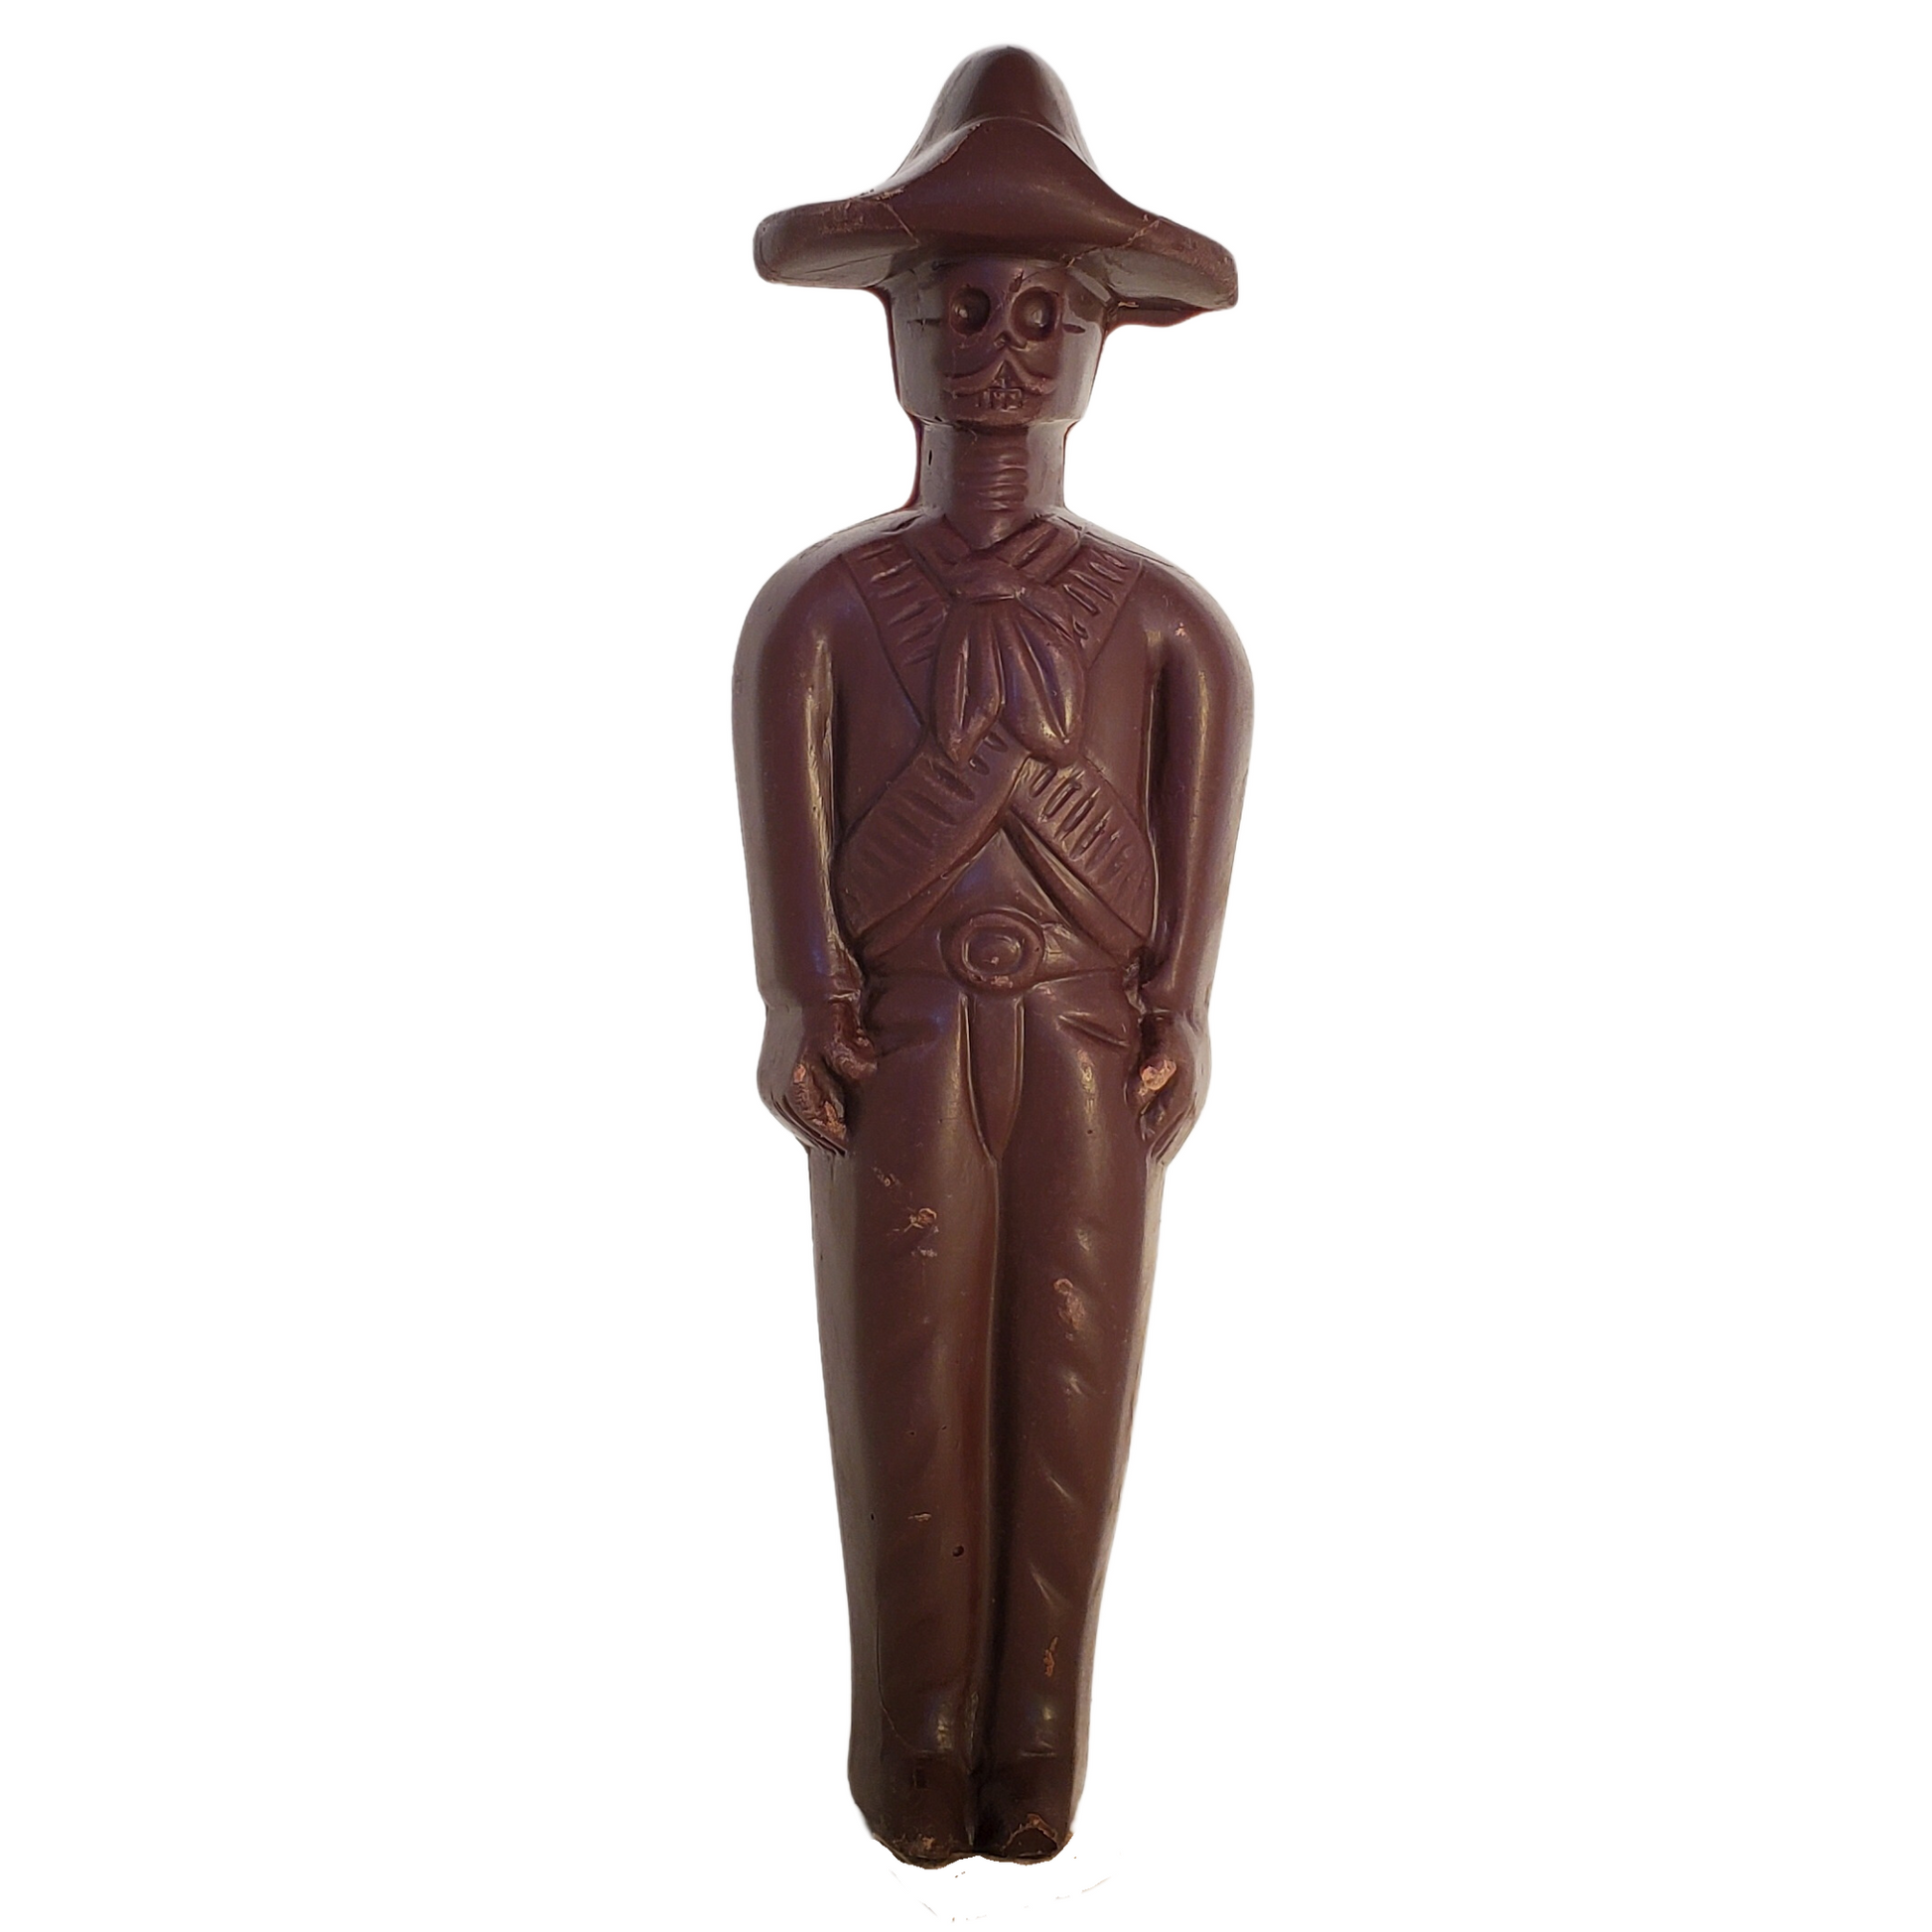 Dark chocolate figure of a Zapatista rebel with a skull face and wearing a sombrero.